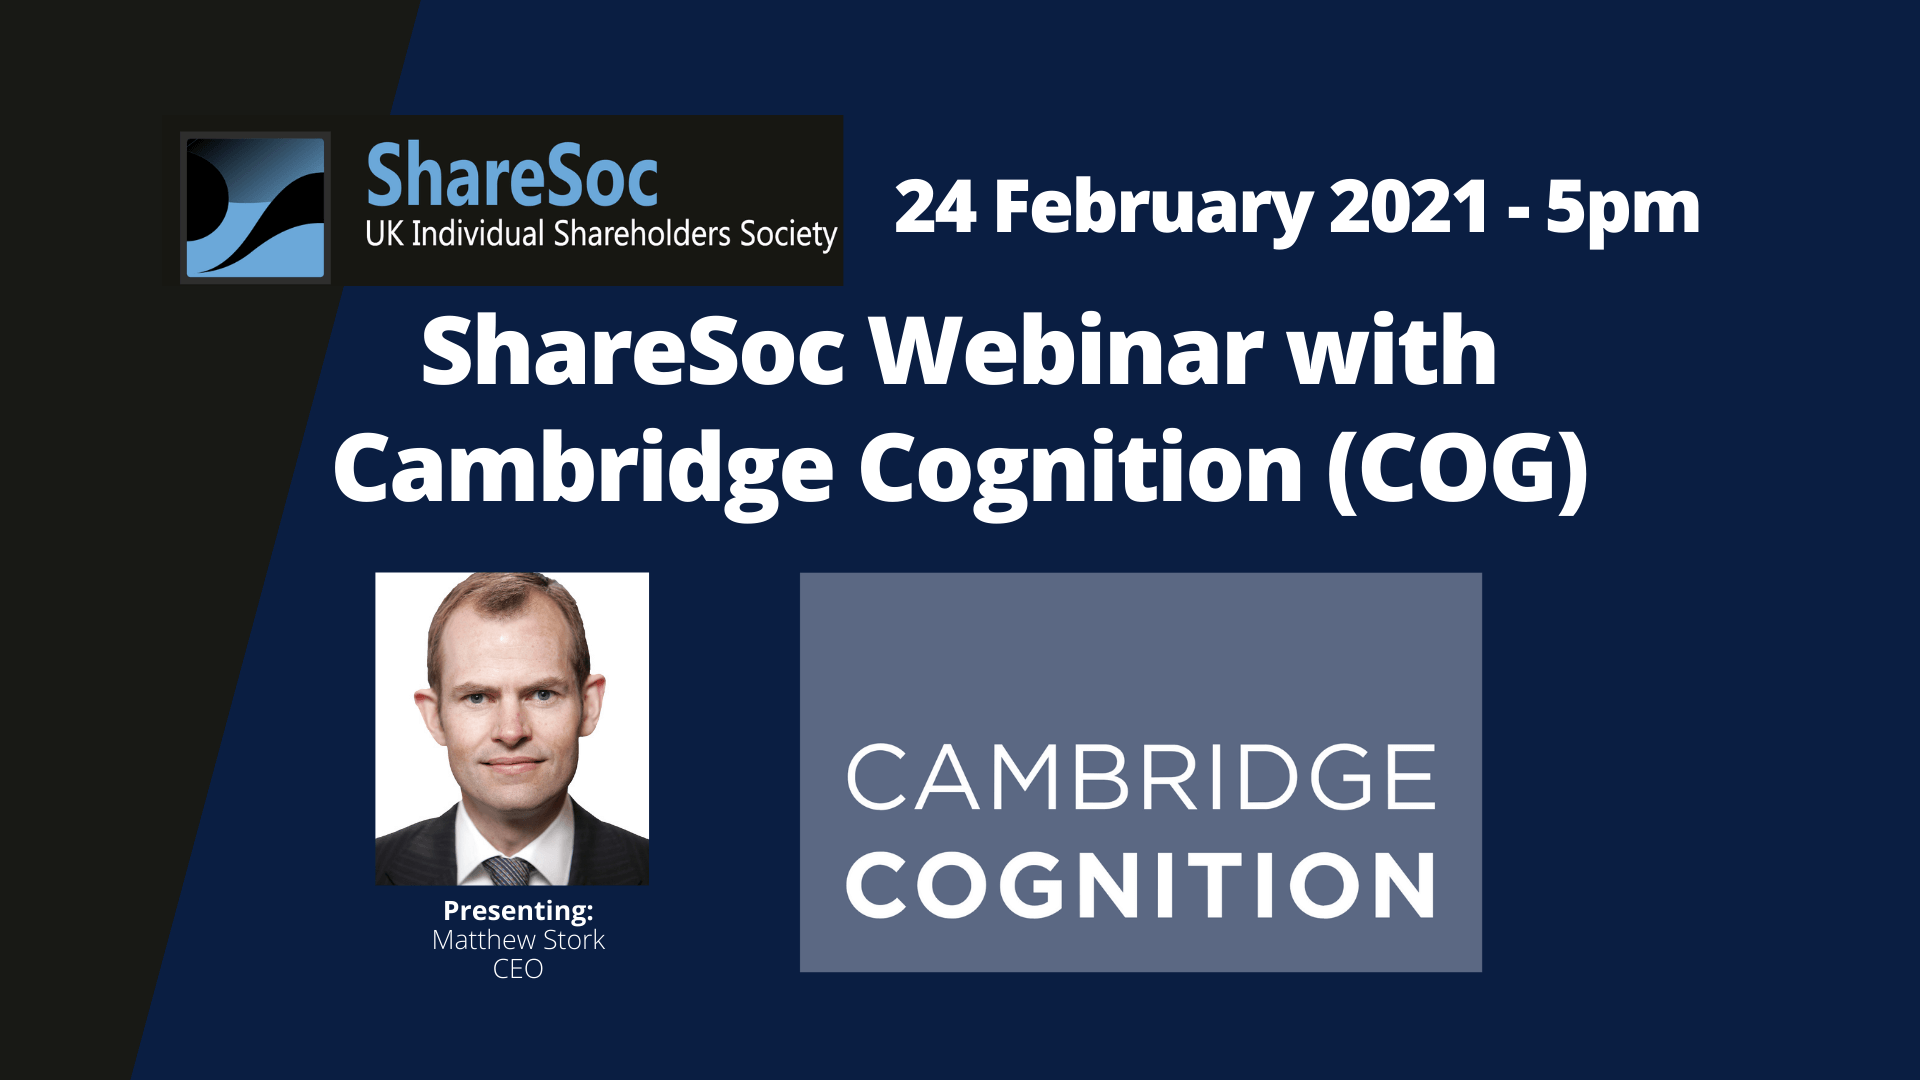 ShareSoc Webinar with Cambridge Cognition (COG), 24 February 2021